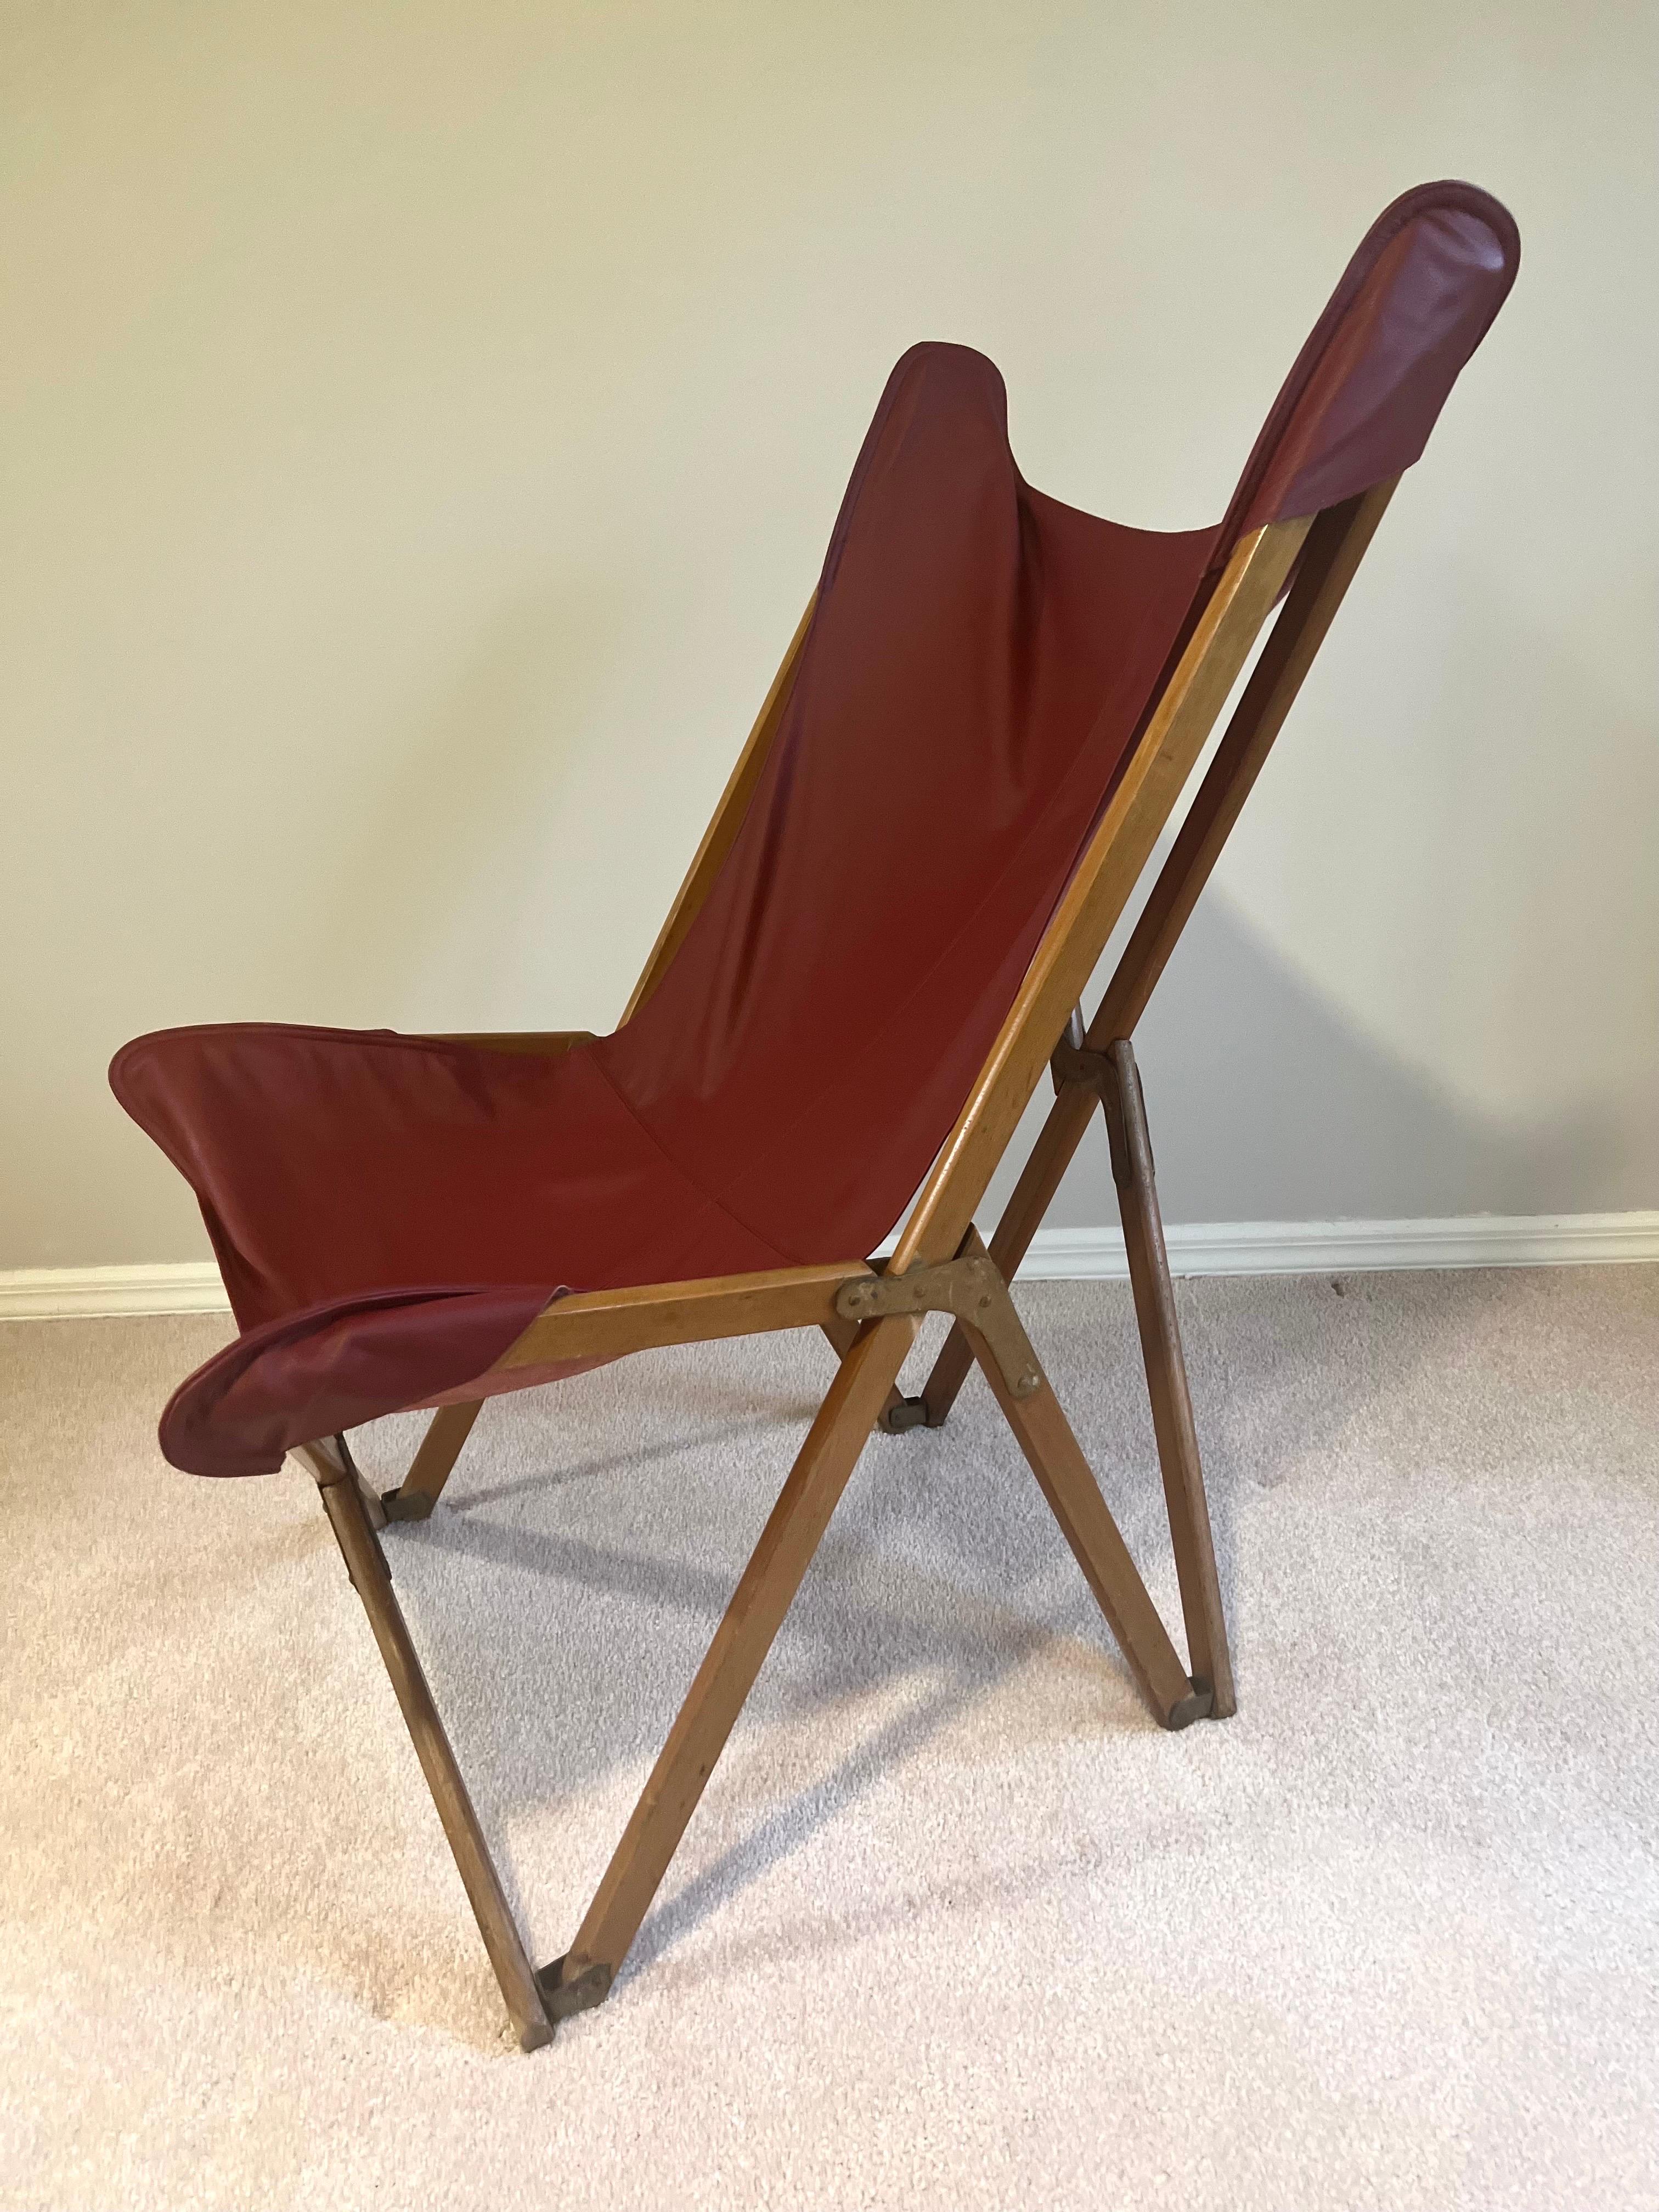 Pair Italian Wood & Leather Folding Tripolina Lounge Chairs, Joseph Fendy, 1937 In Good Condition For Sale In New York, NY